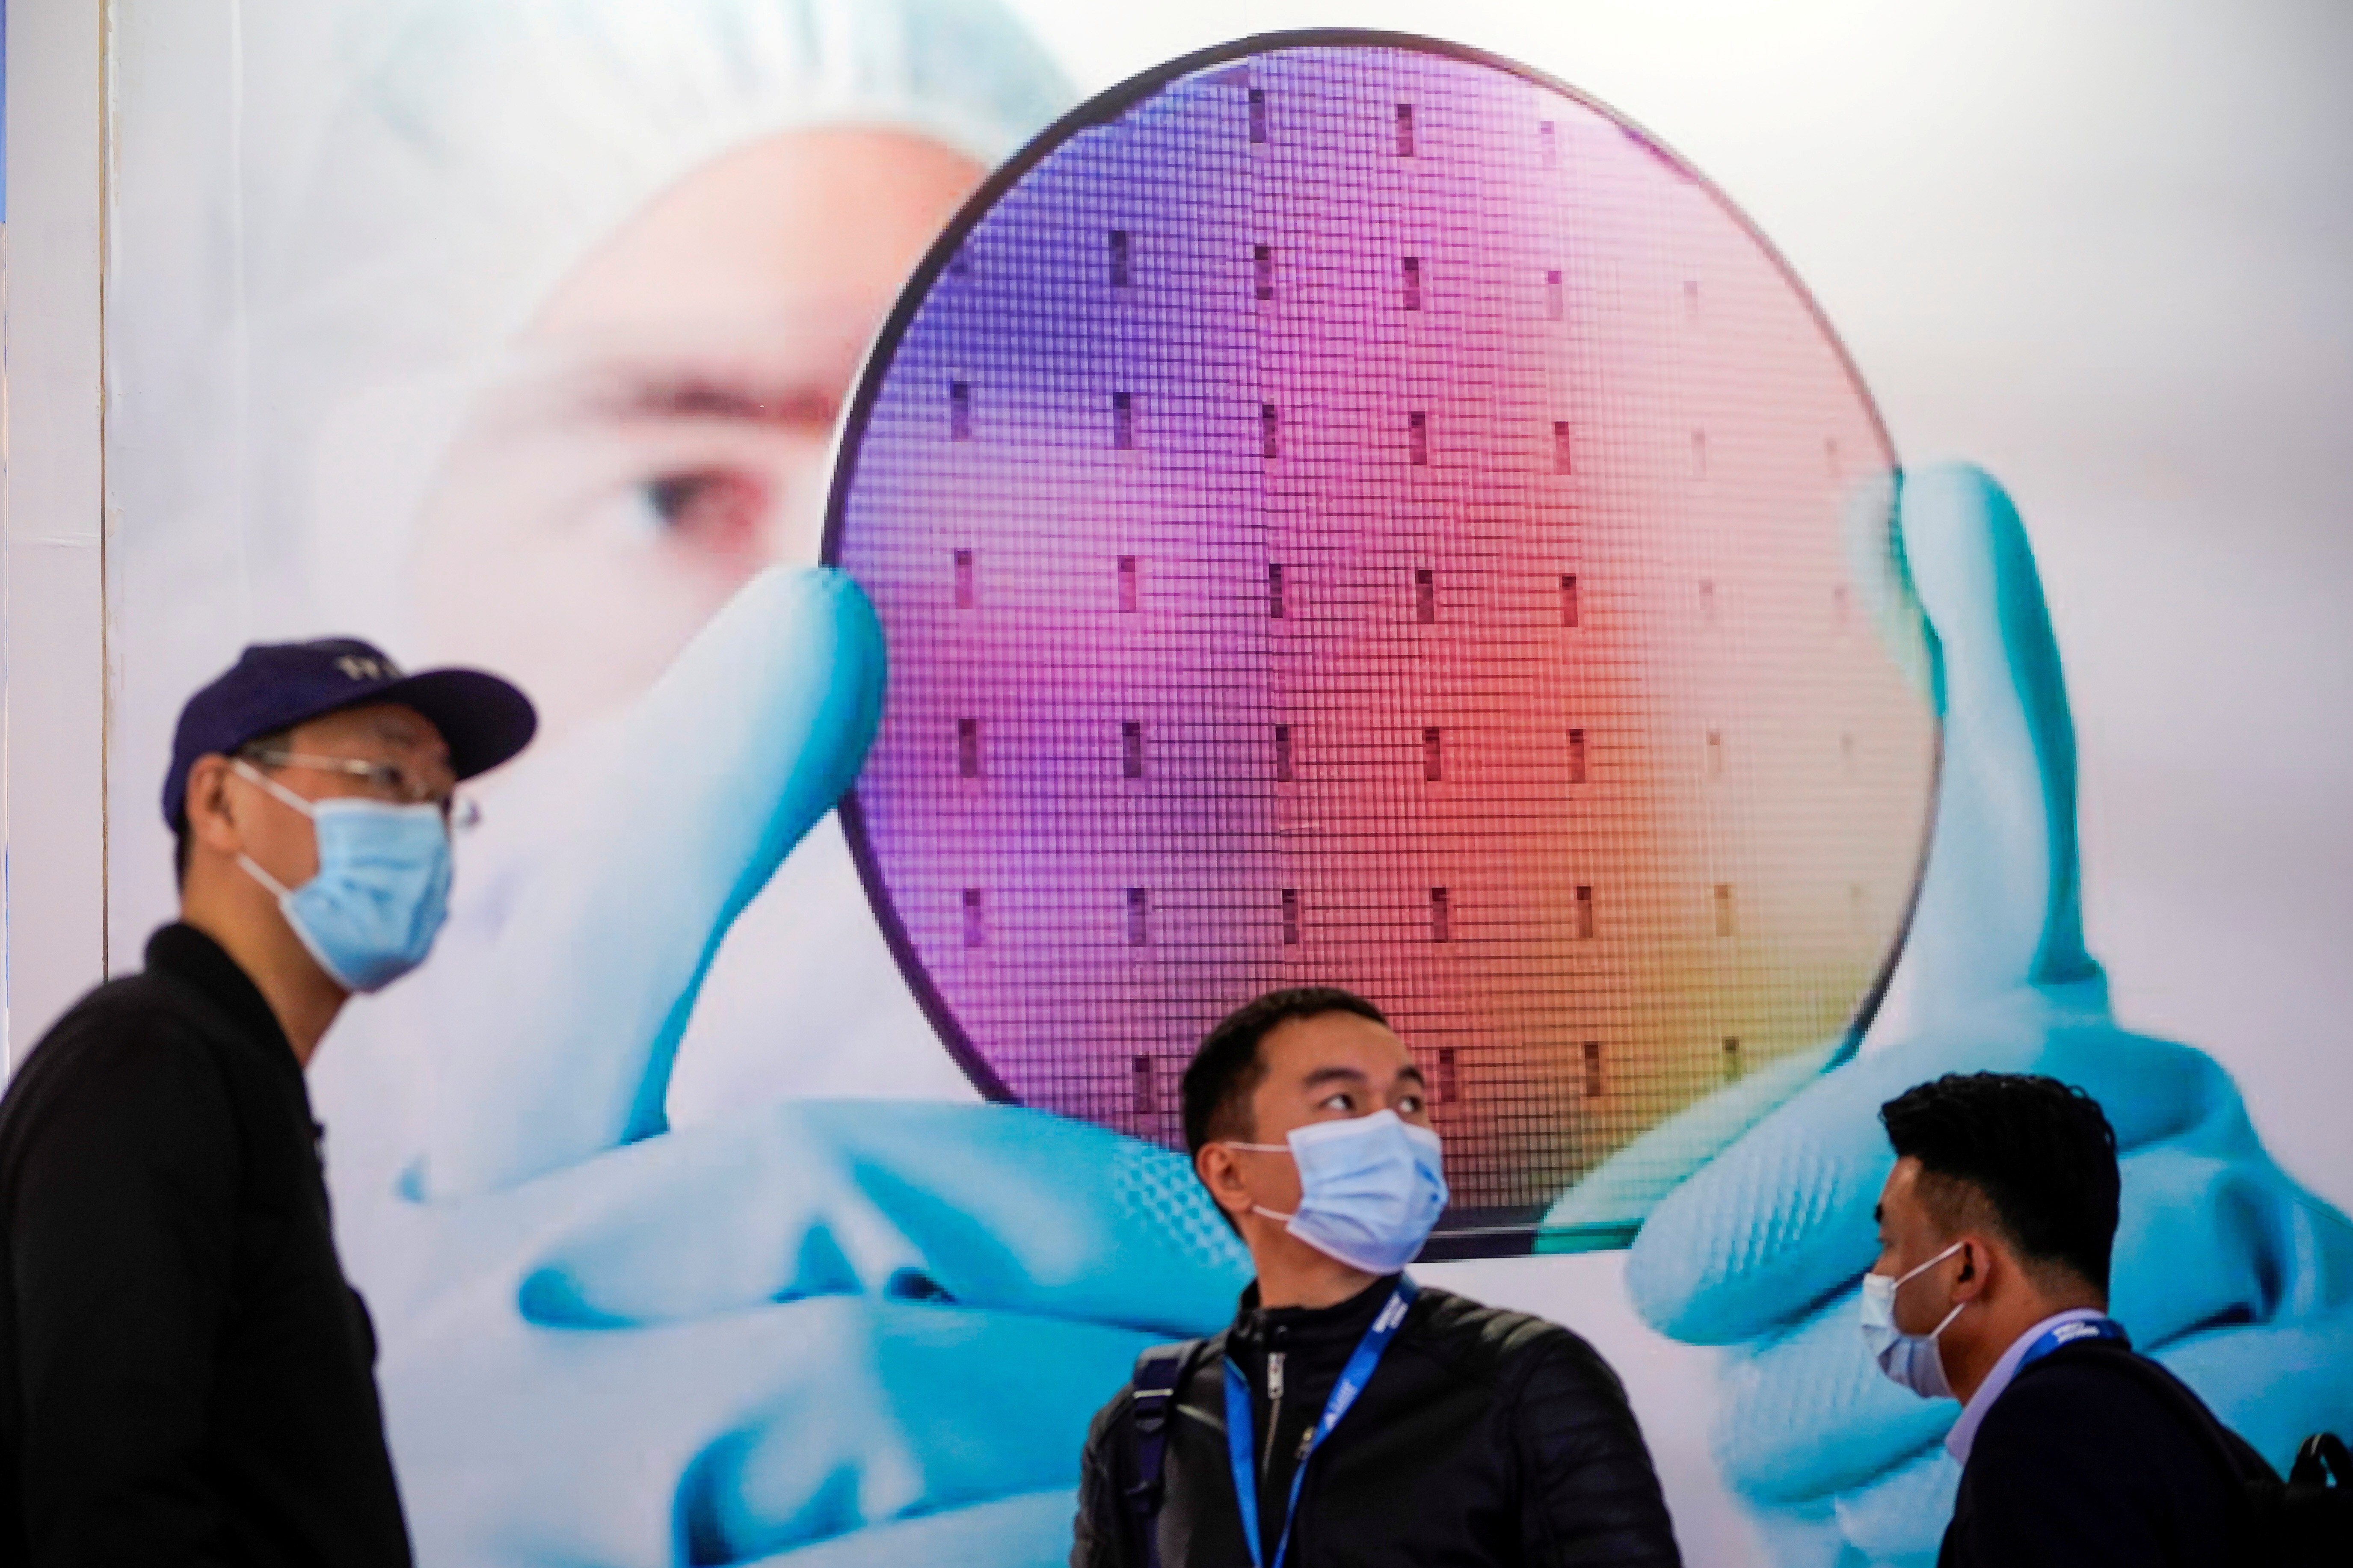 People in front of a display of a semiconductor device at Semicon China, a trade fair for semiconductor technology in Shanghai, on March 17. Photo: Reuters